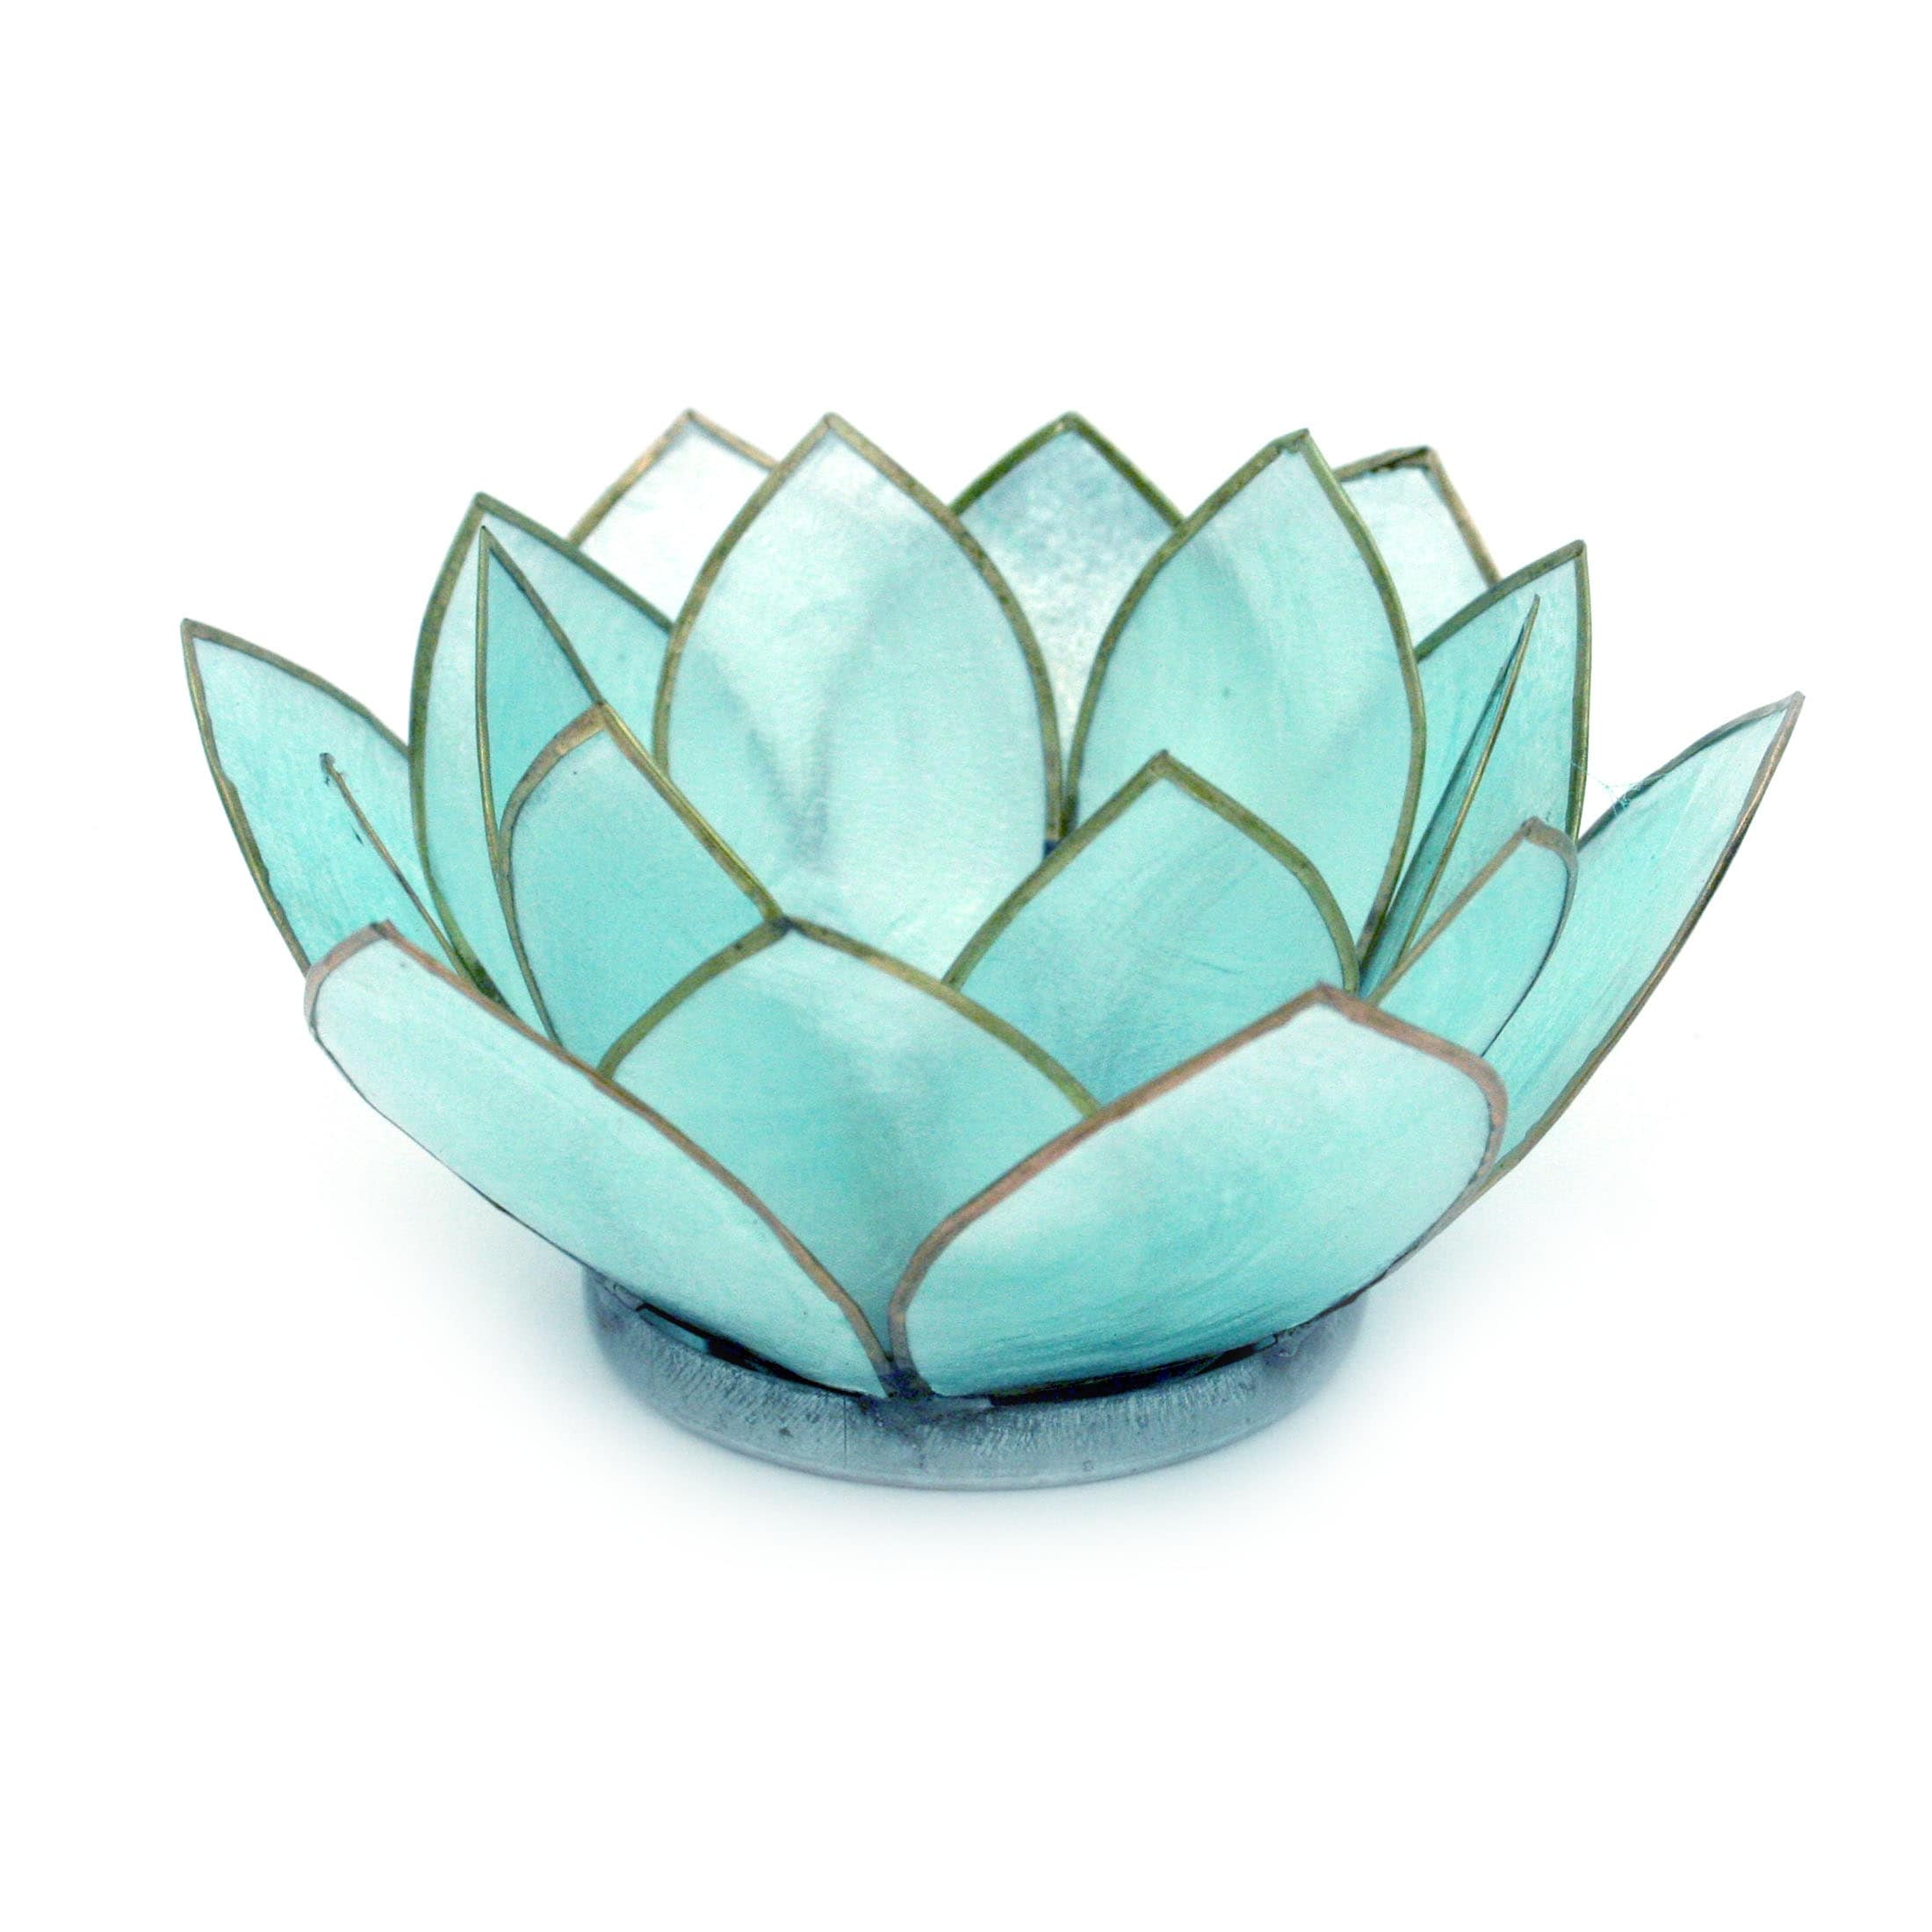 Blue Capiz Shell Blooming Lotus Flower Blossom Tealight Candle Holder - 2.25 X 4.5 X 4.25 inches